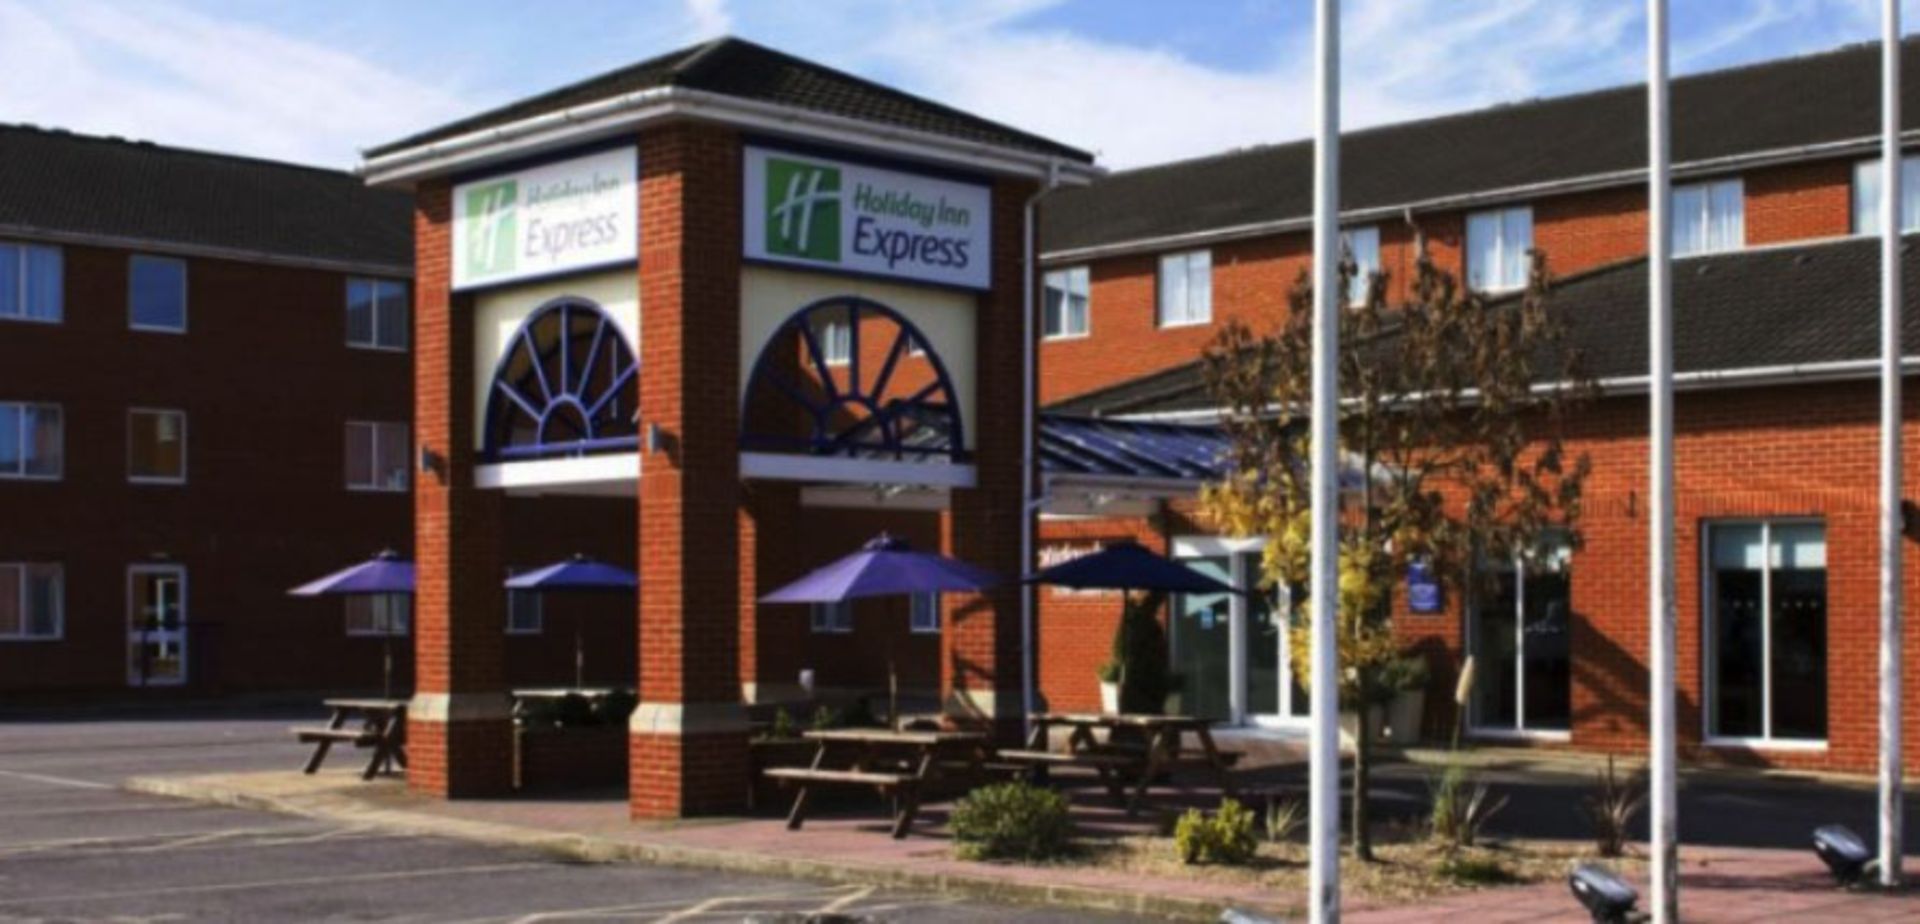 One night in the 3* Holiday Inn Express Southampton West.